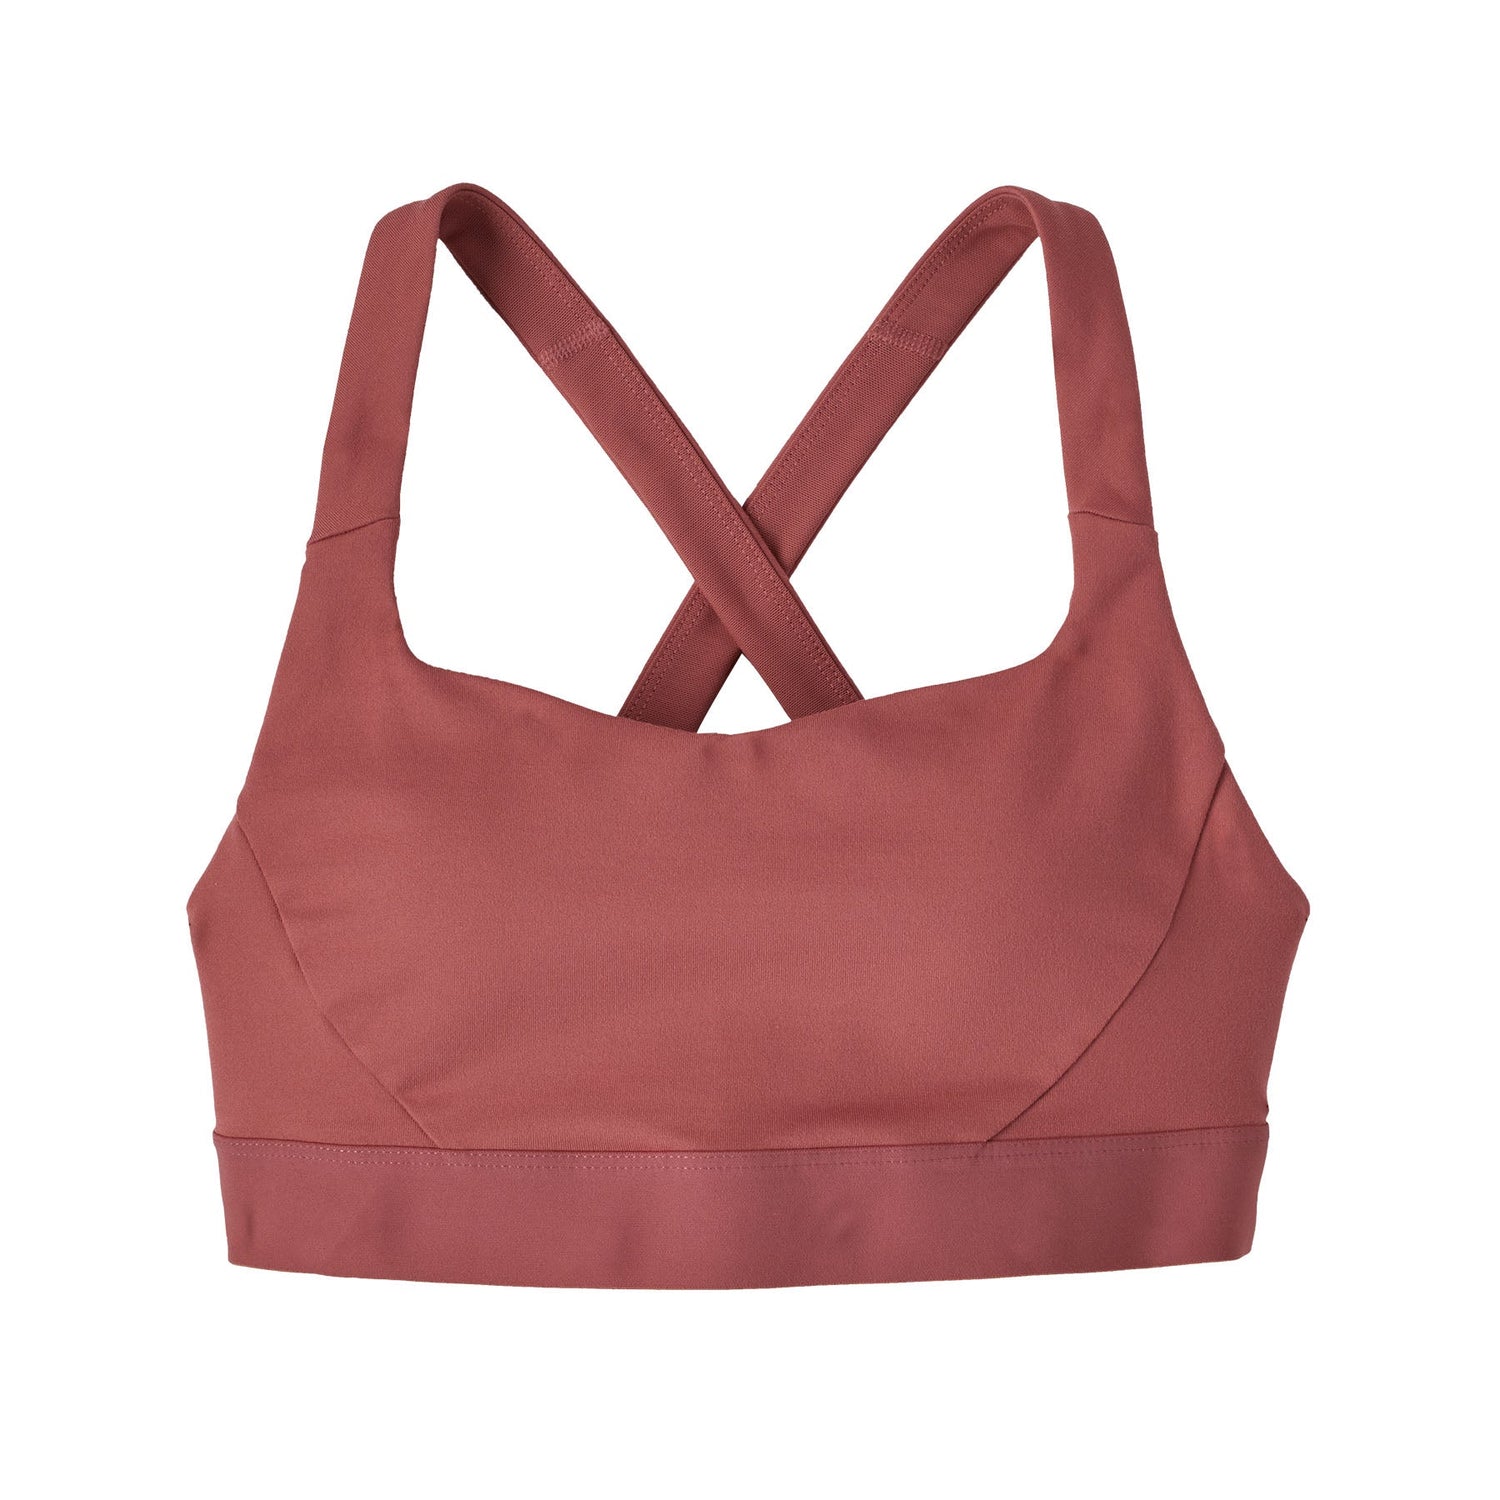 Patagonia Switchback Sports Bra - Recycled Polyester Rosehip Underwear